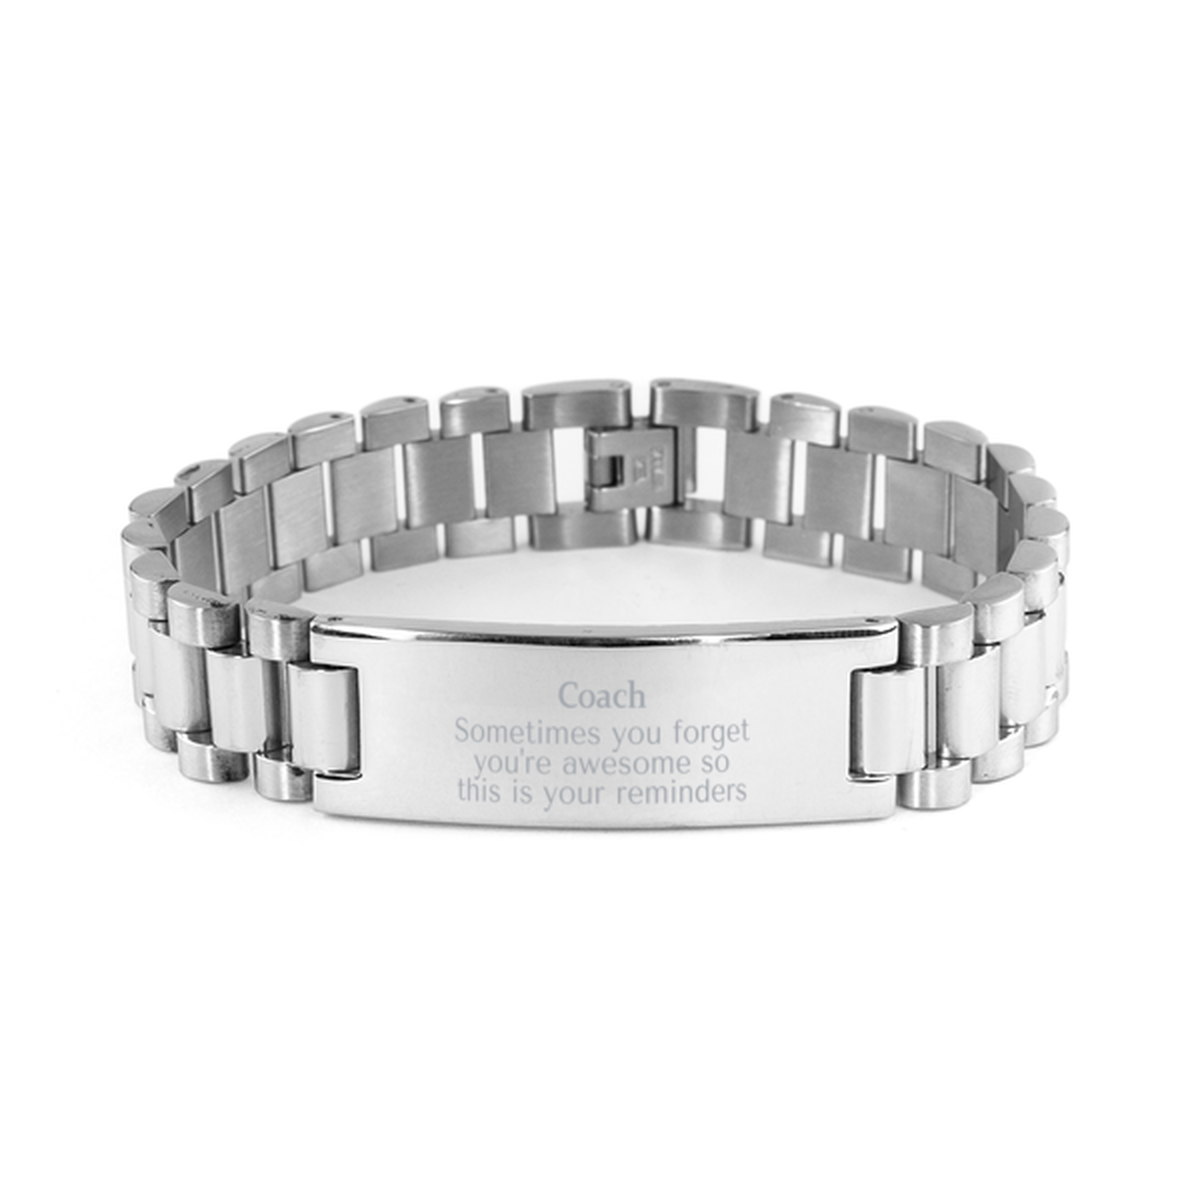 Sentimental Coach Ladder Stainless Steel Bracelet, Coach Sometimes you forget you're awesome so this is your reminders, Graduation Christmas Birthday Gifts for Coach, Men, Women, Coworkers